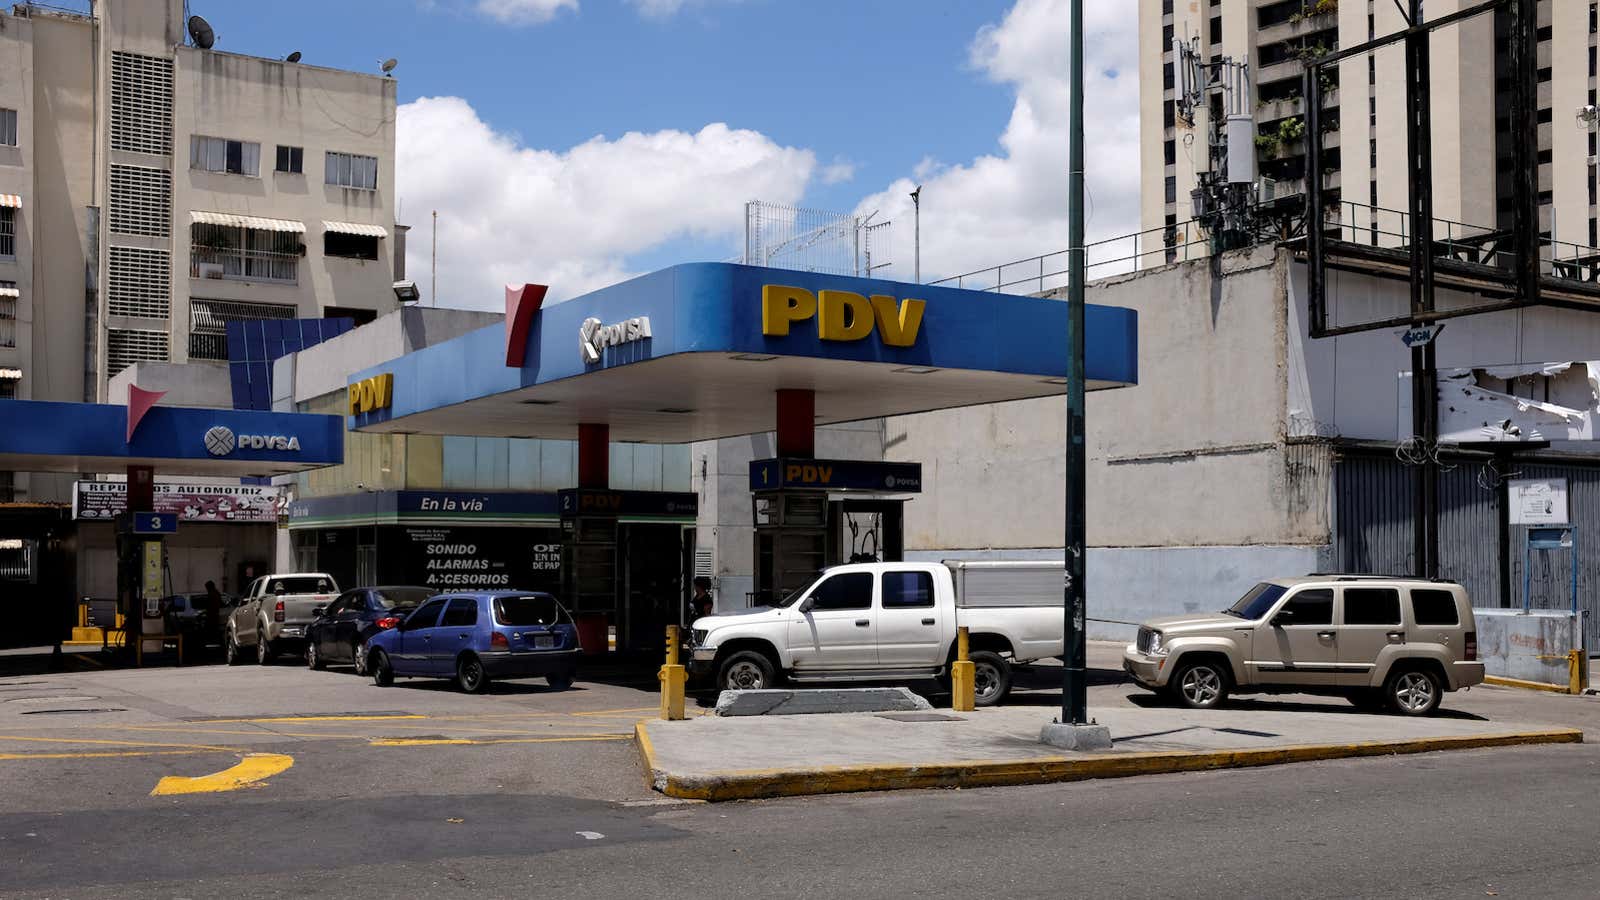 Venezuelans line up for gas in Caracas. But bondholders don’t have to line up for payments.